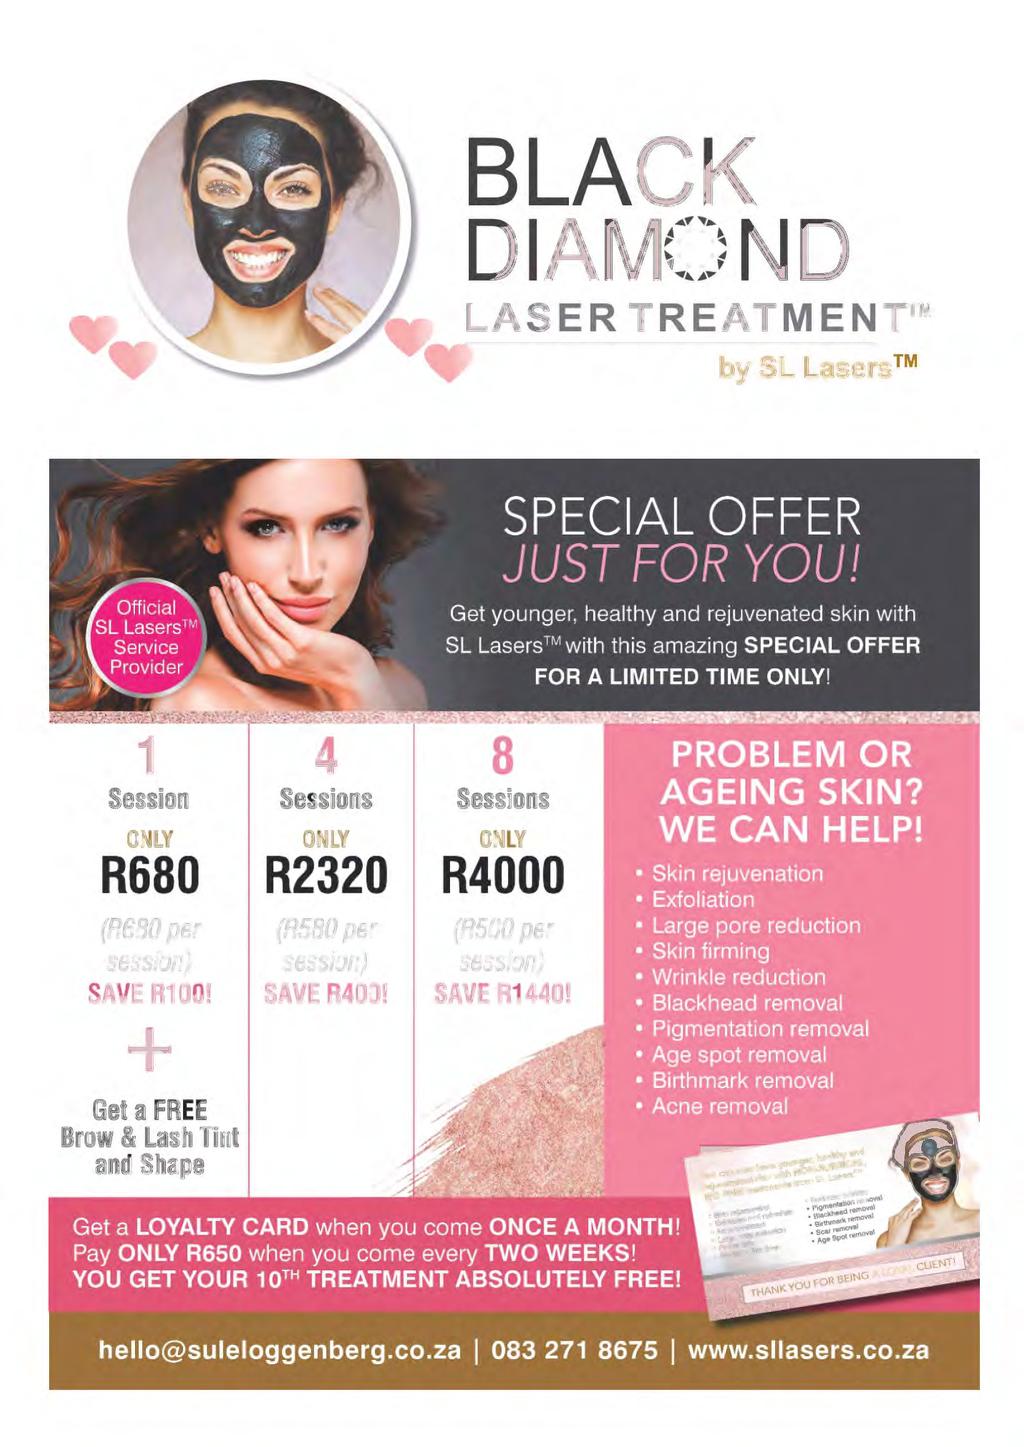 BLACK DIAMC)ND LASER T REATMEN T Love your skin by SL Lasers SPECIAL OFFER JUST FOR YOU!